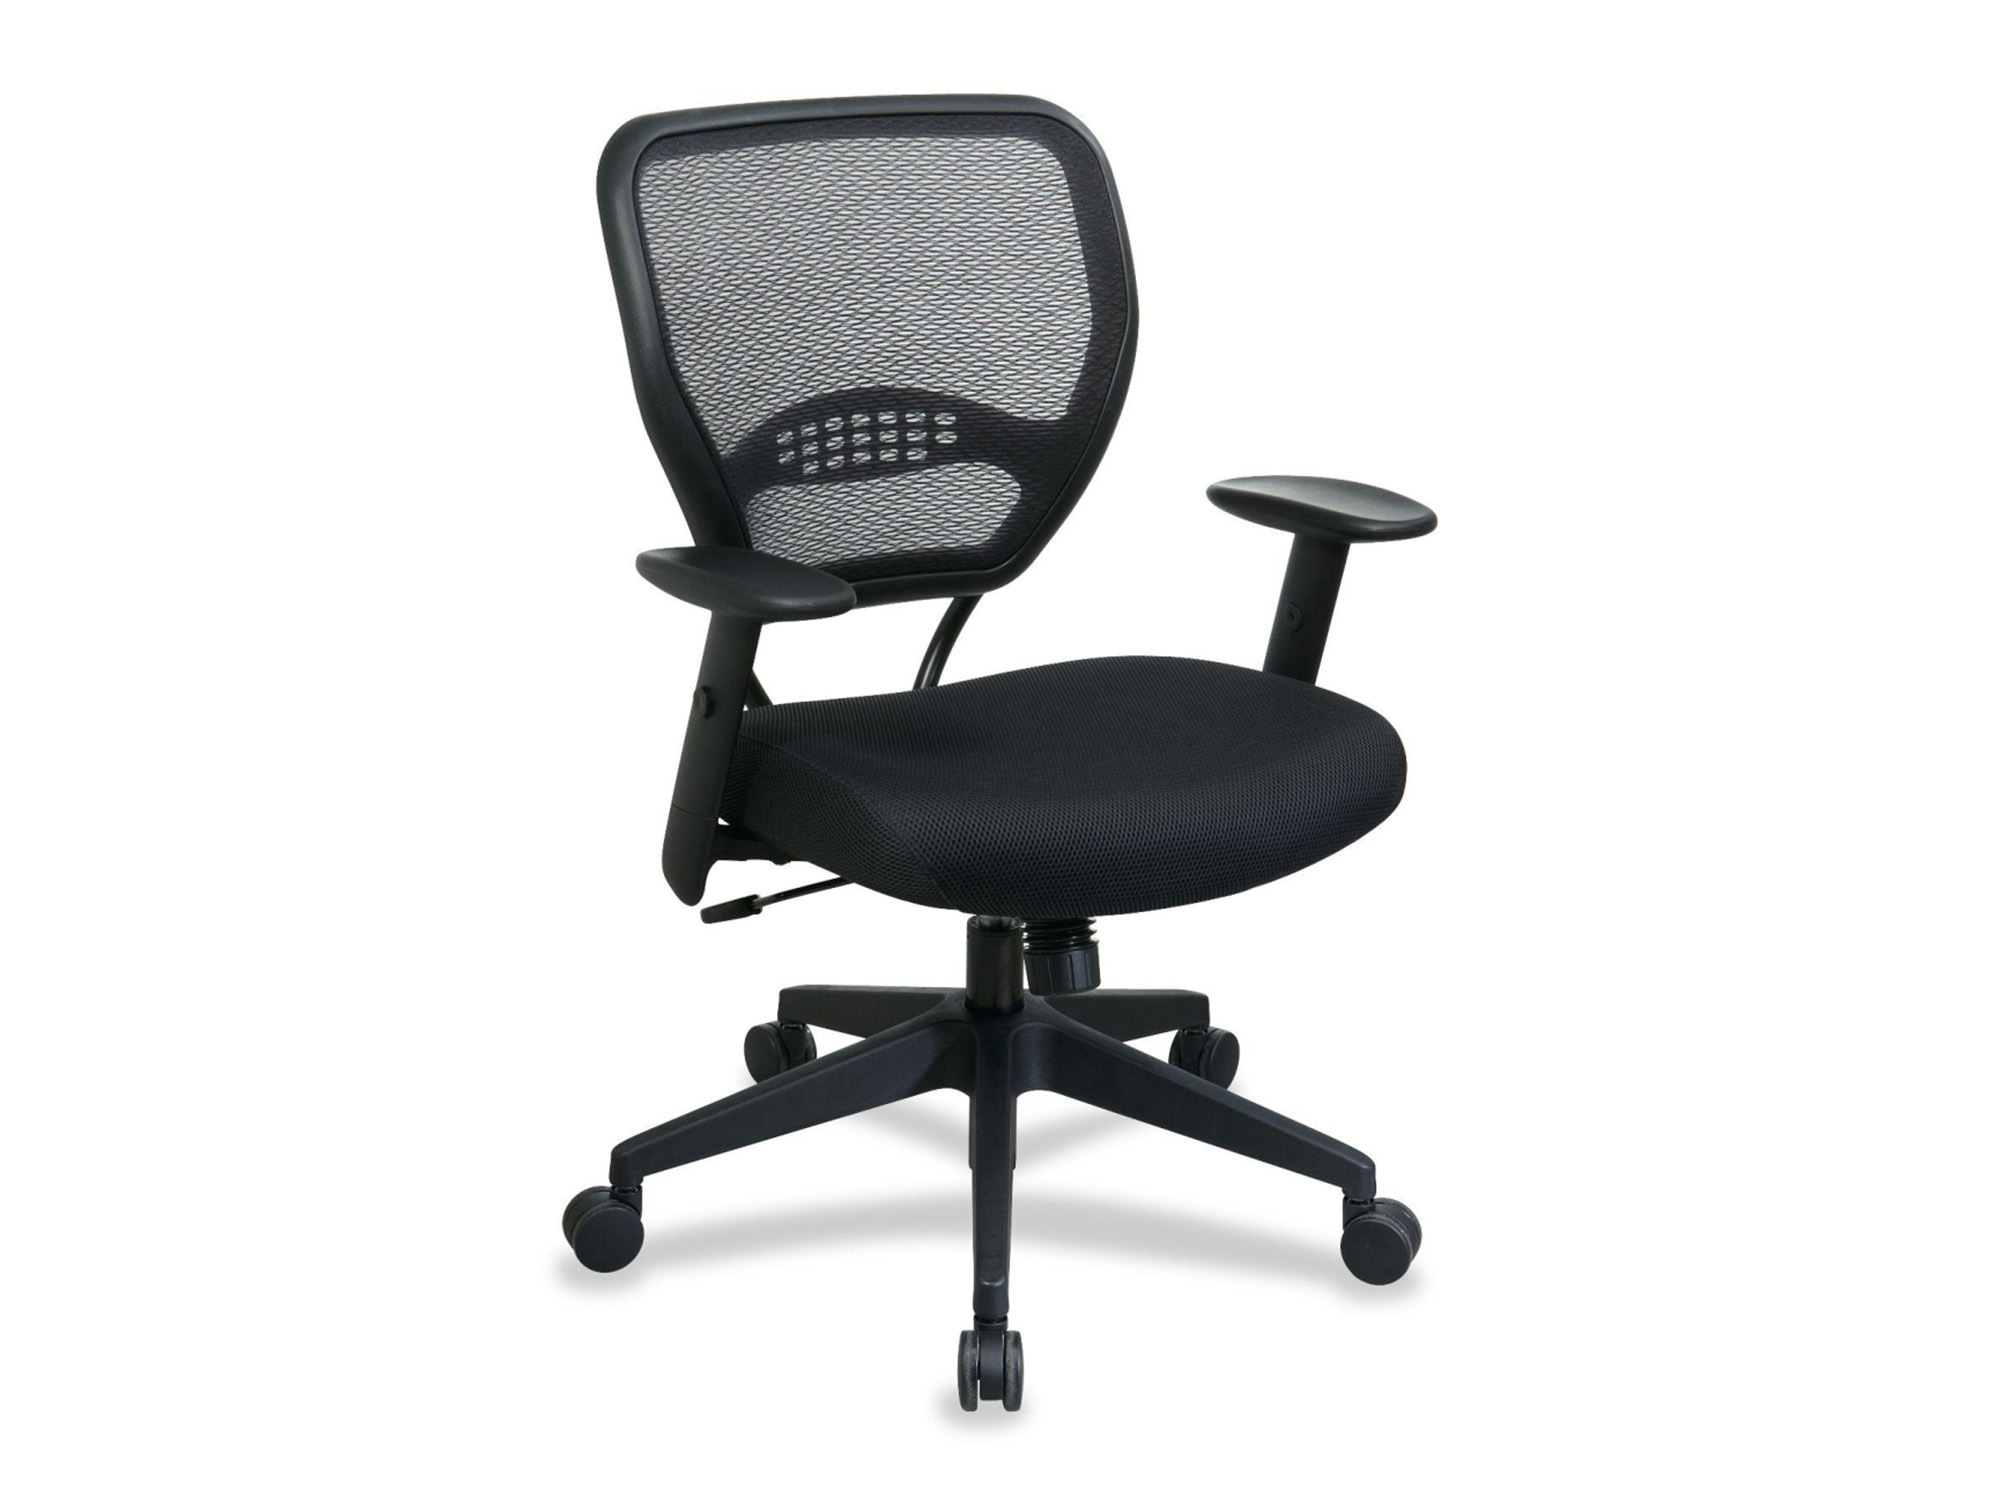 Ergonomic Mesh Office Chair - Space Chairs For Office